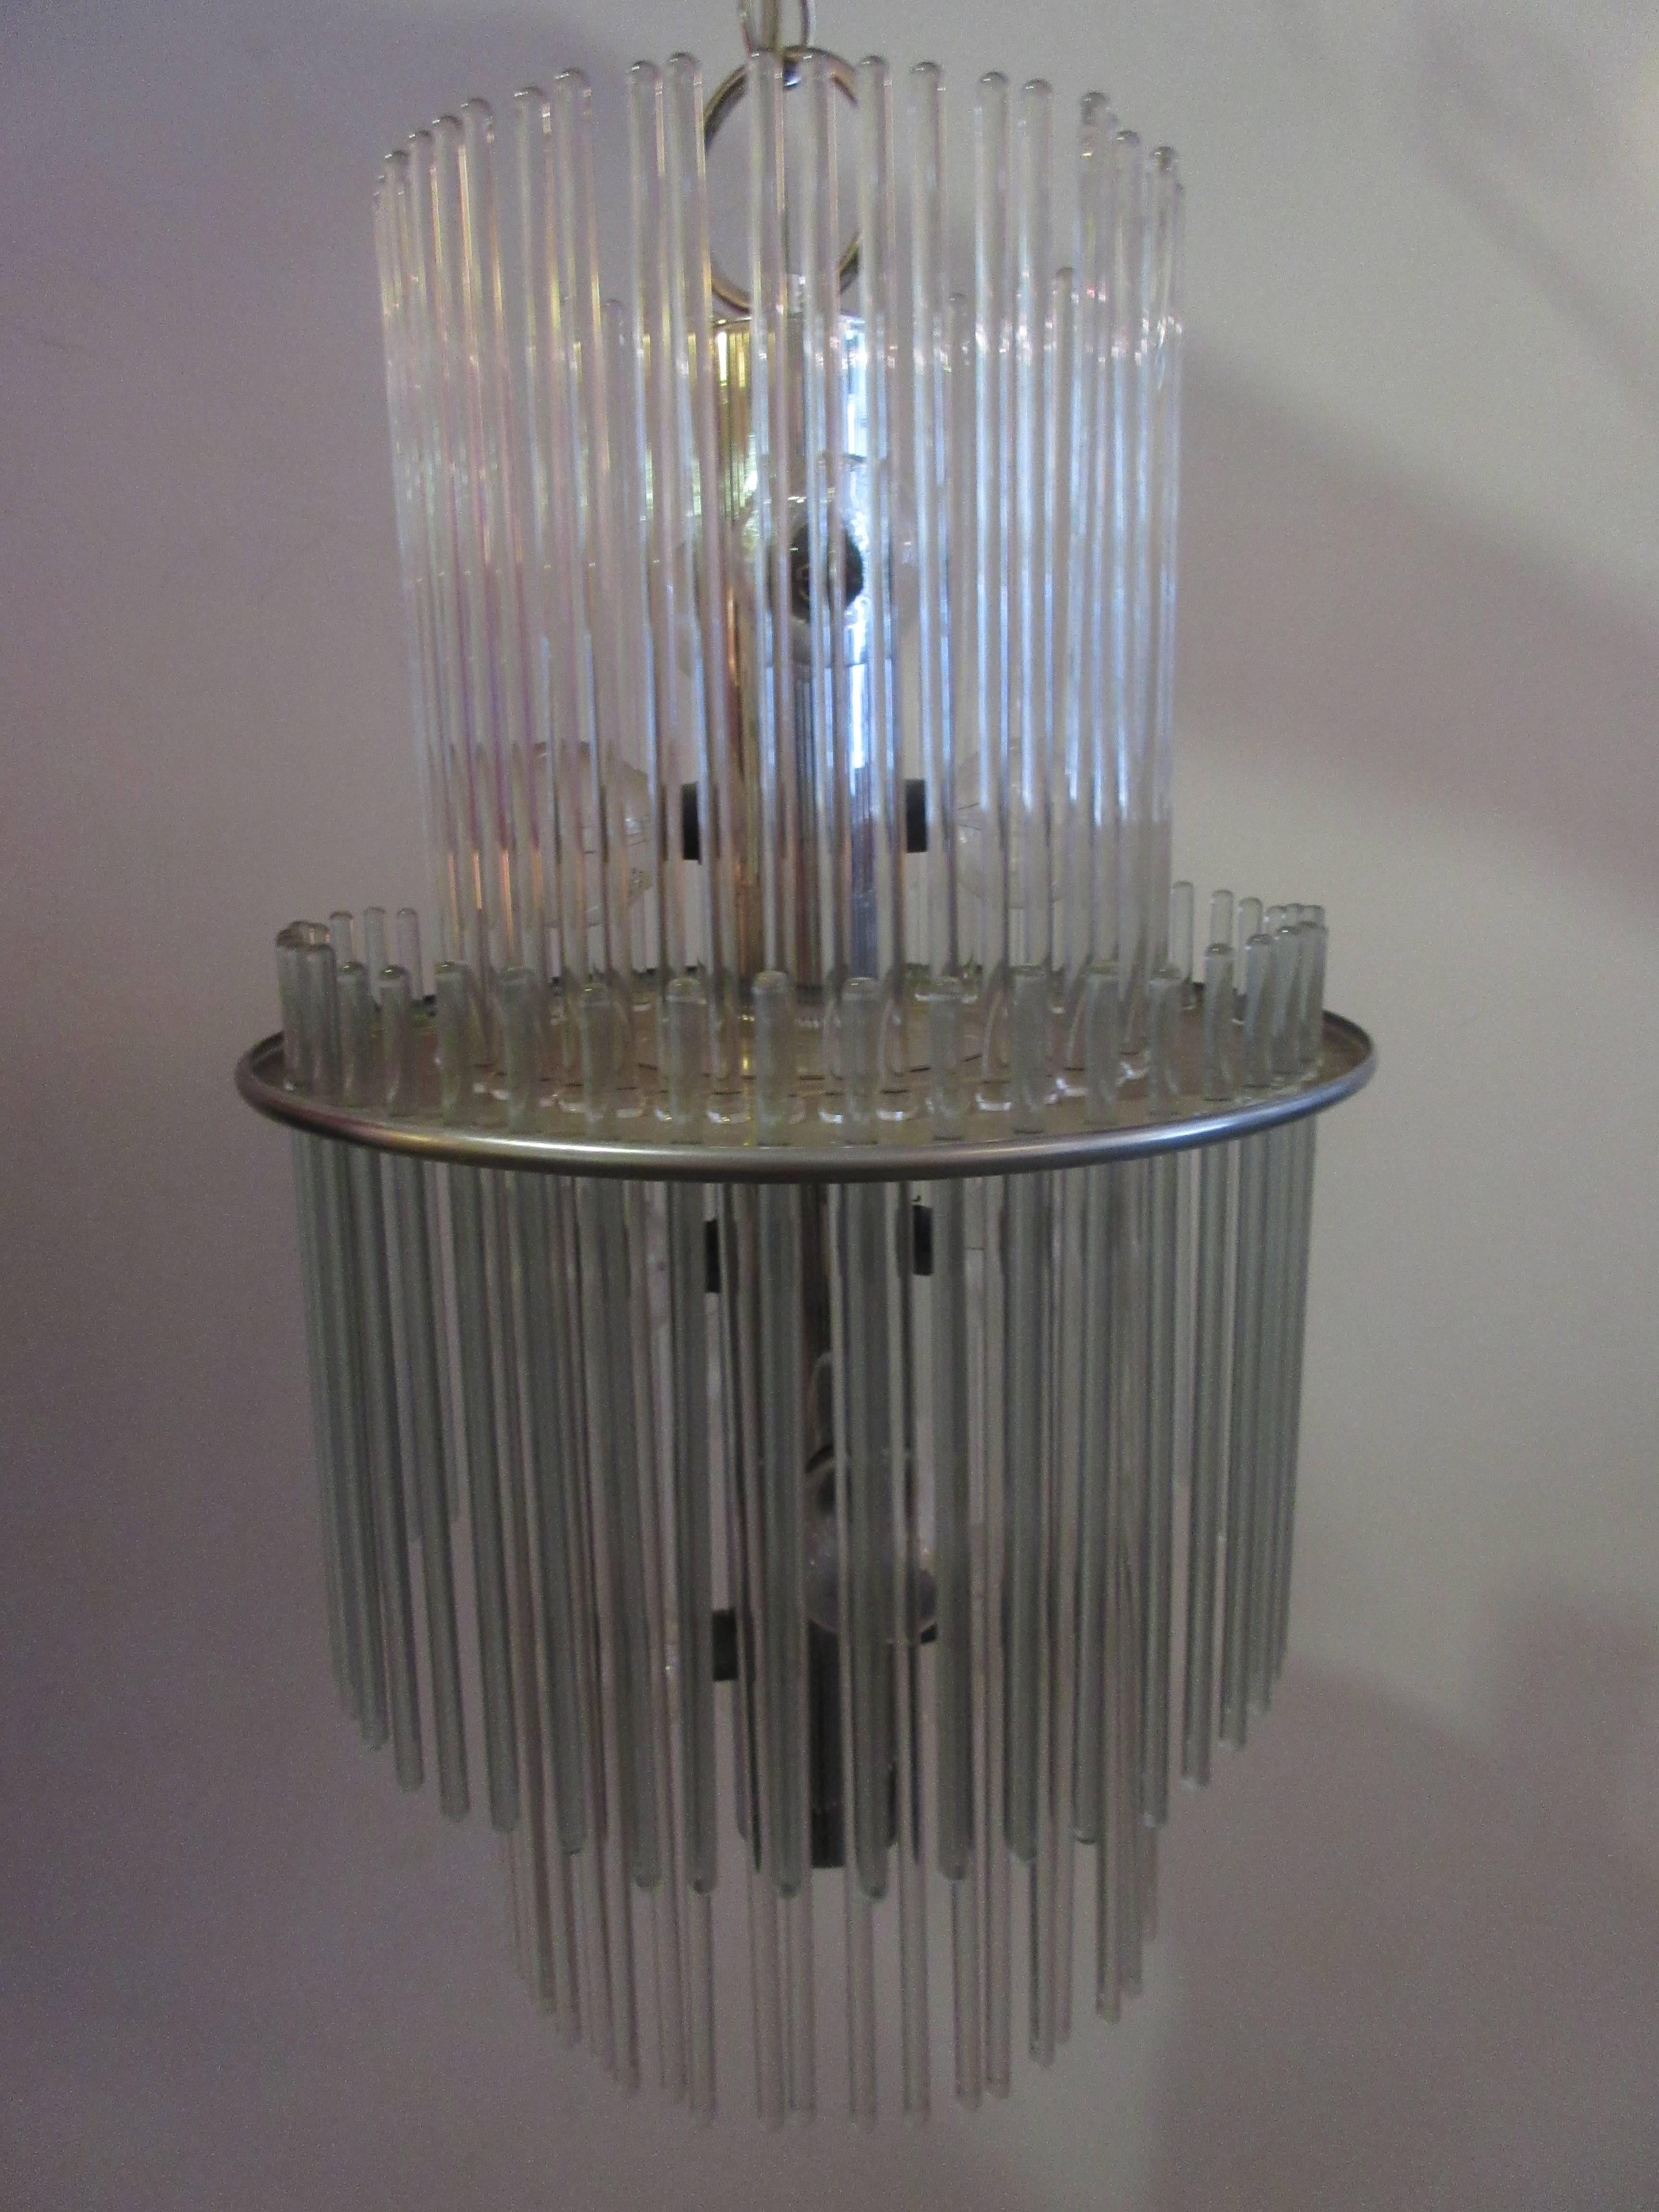 Scolari for Lightolier radiance chandelier with two tiers of glass rods that overlap and twelve-light sockets providing a sparkling light source. Metal is chrome on fixture and supporting chain. Chain is two feet and fixture itself 20 inches.